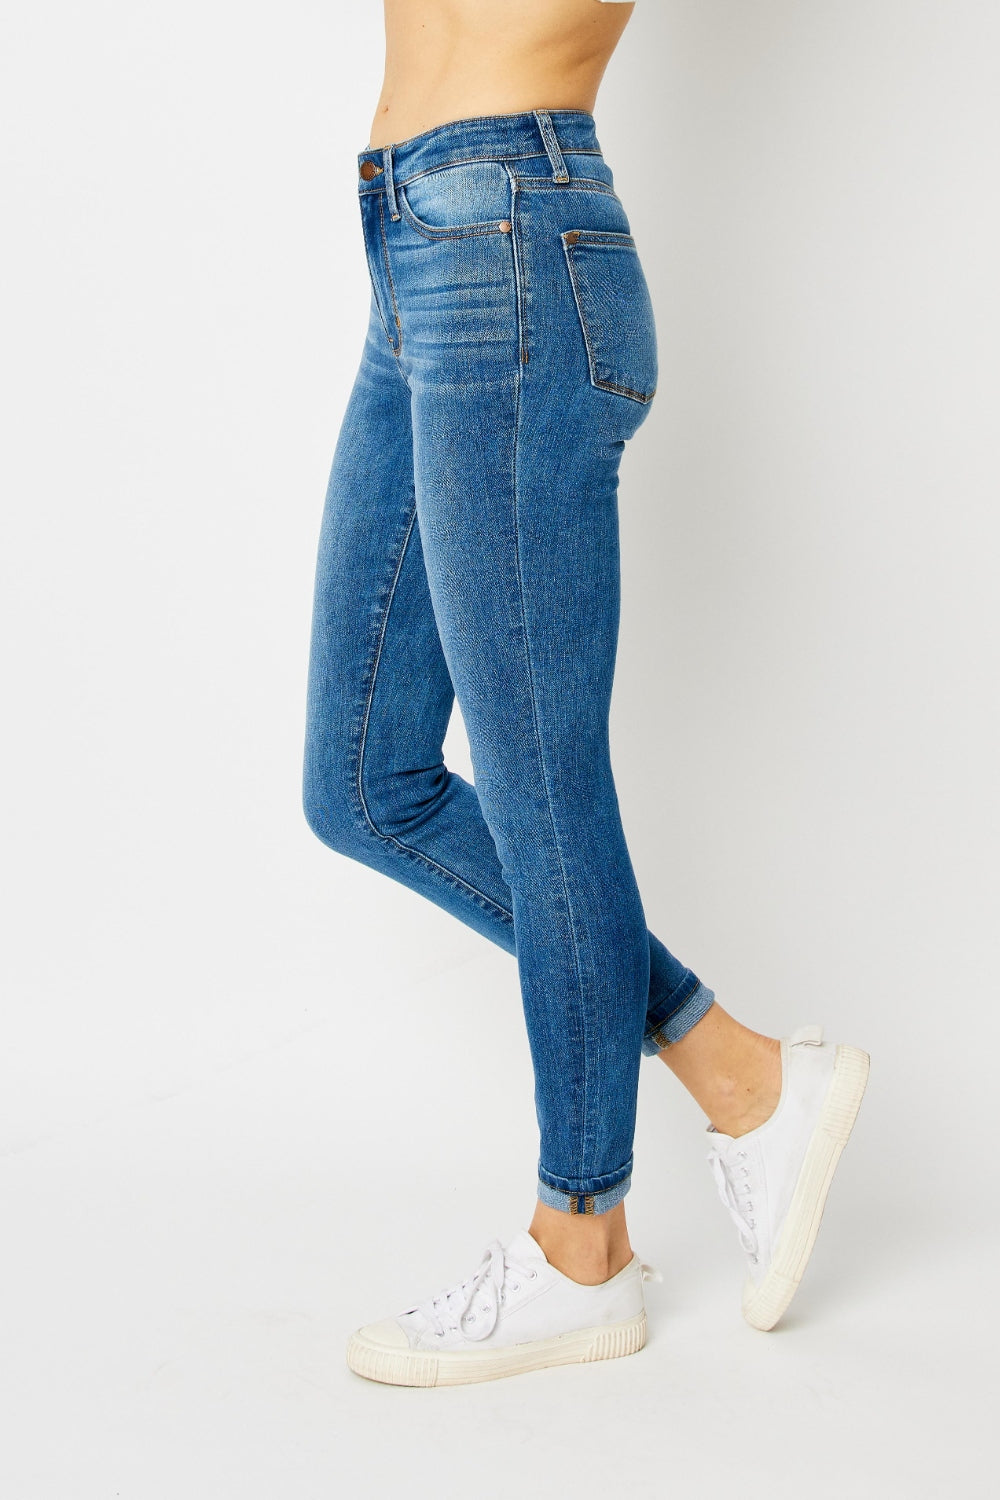 Judy Blue Low Rise Super Stretch Skinny Jeans with Cuffs